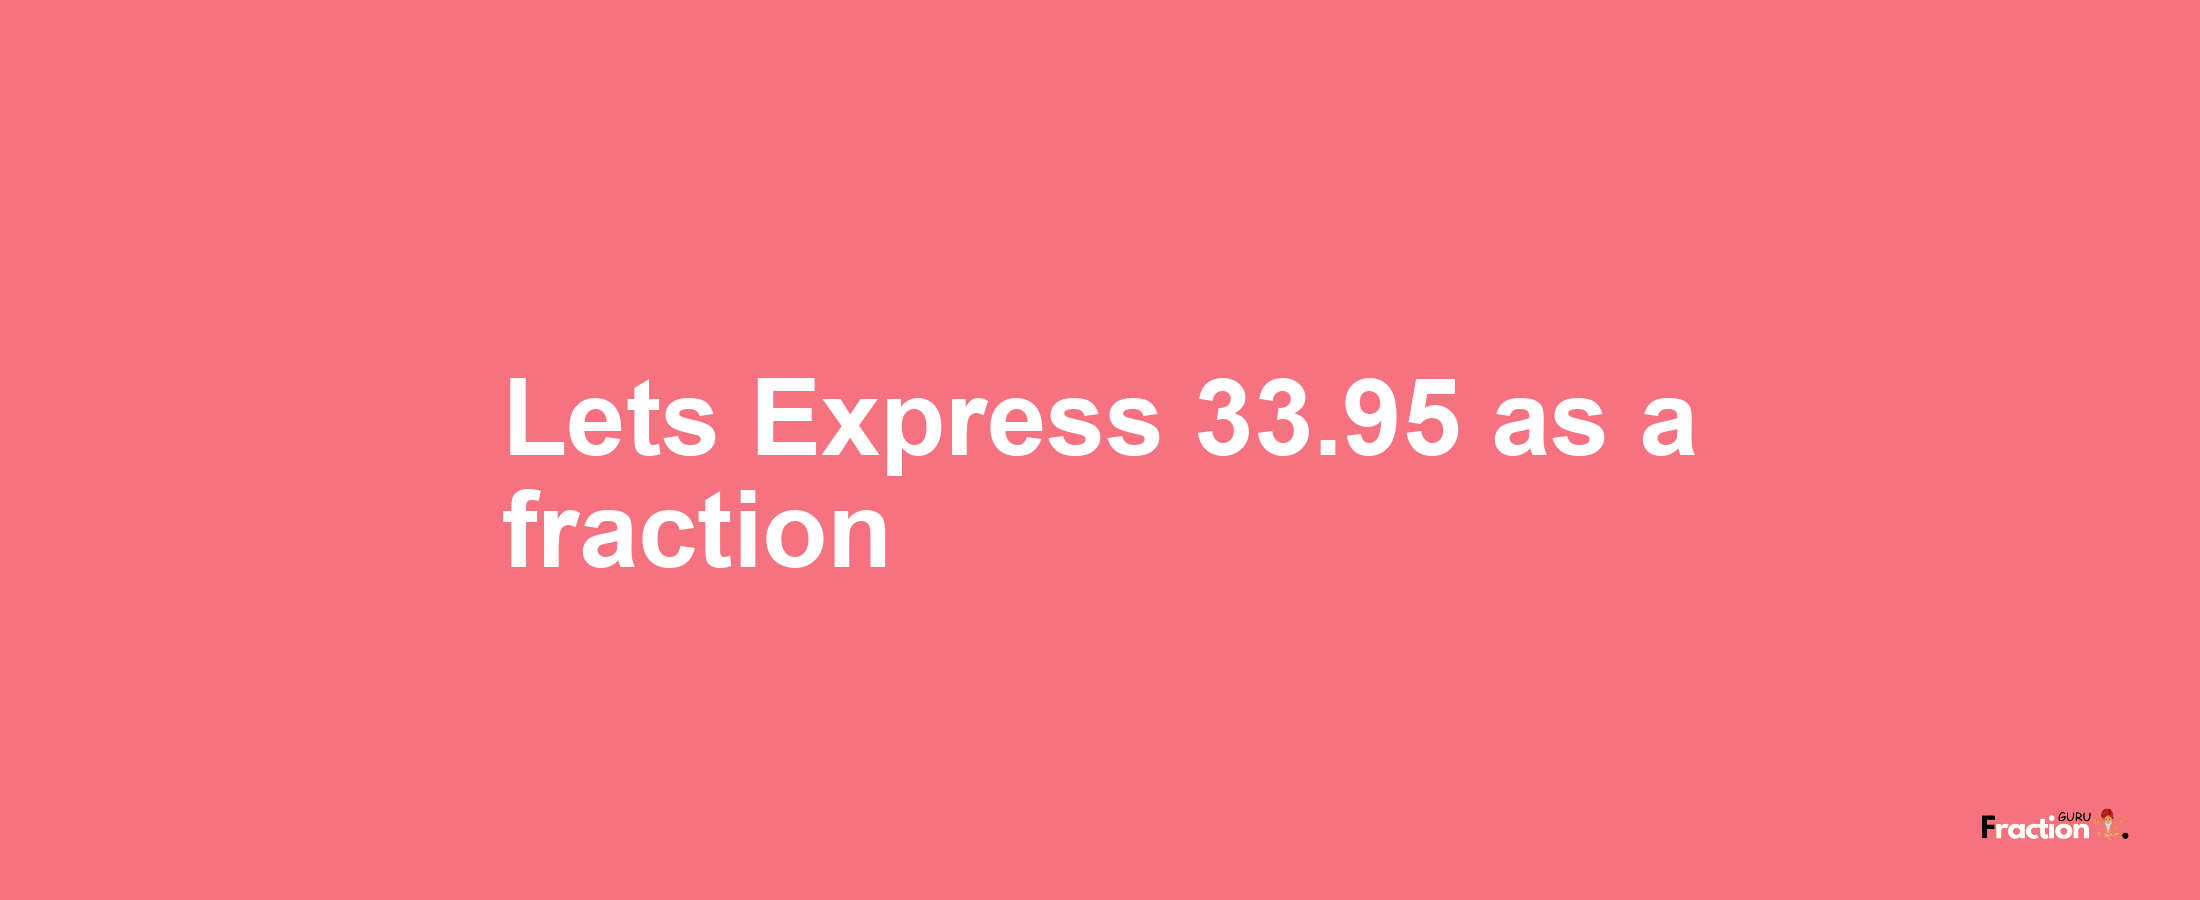 Lets Express 33.95 as afraction